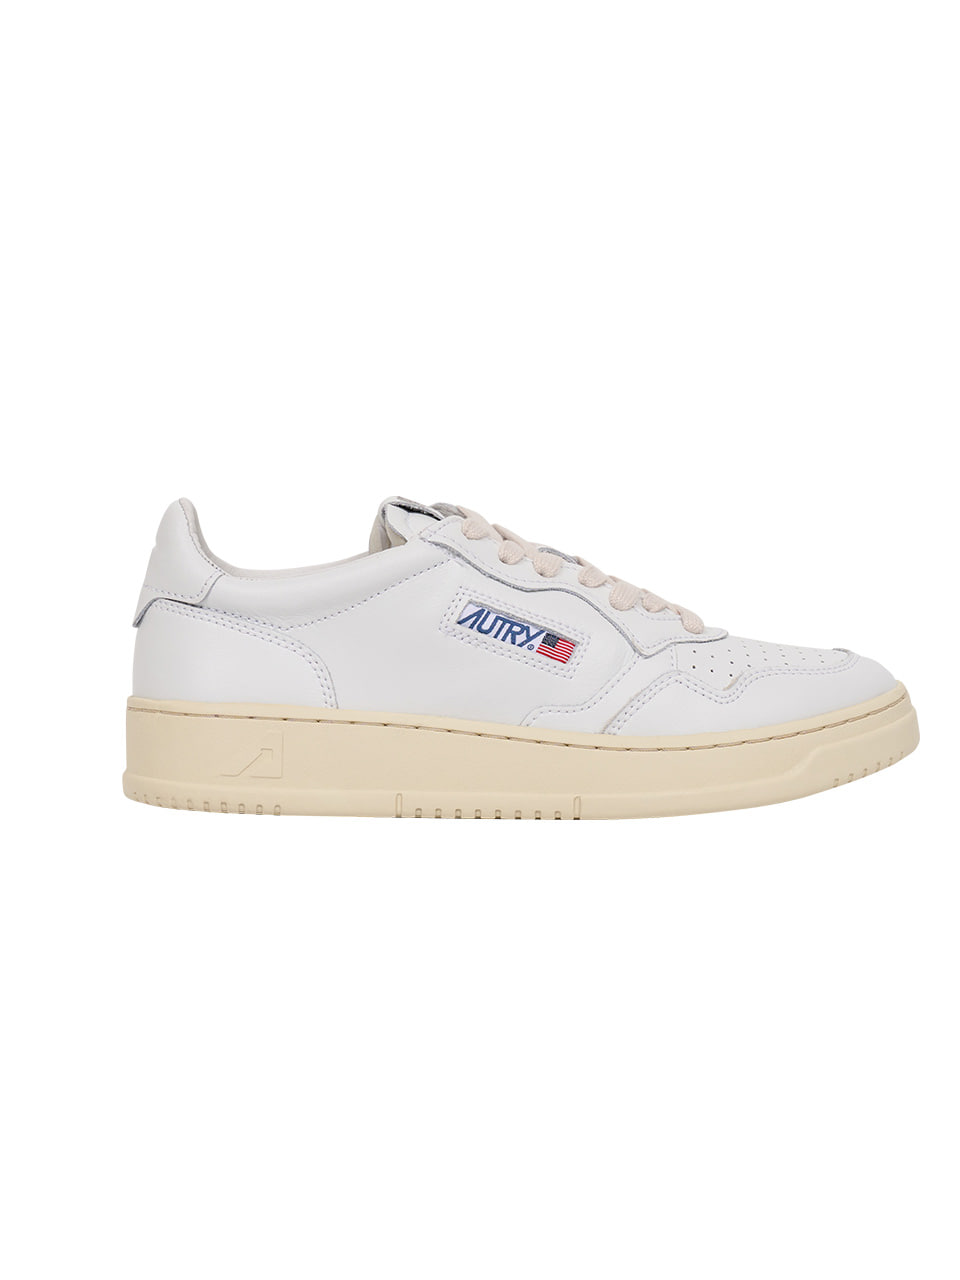 AUTRY - MEDALIST SNEAKERS (WHITE)